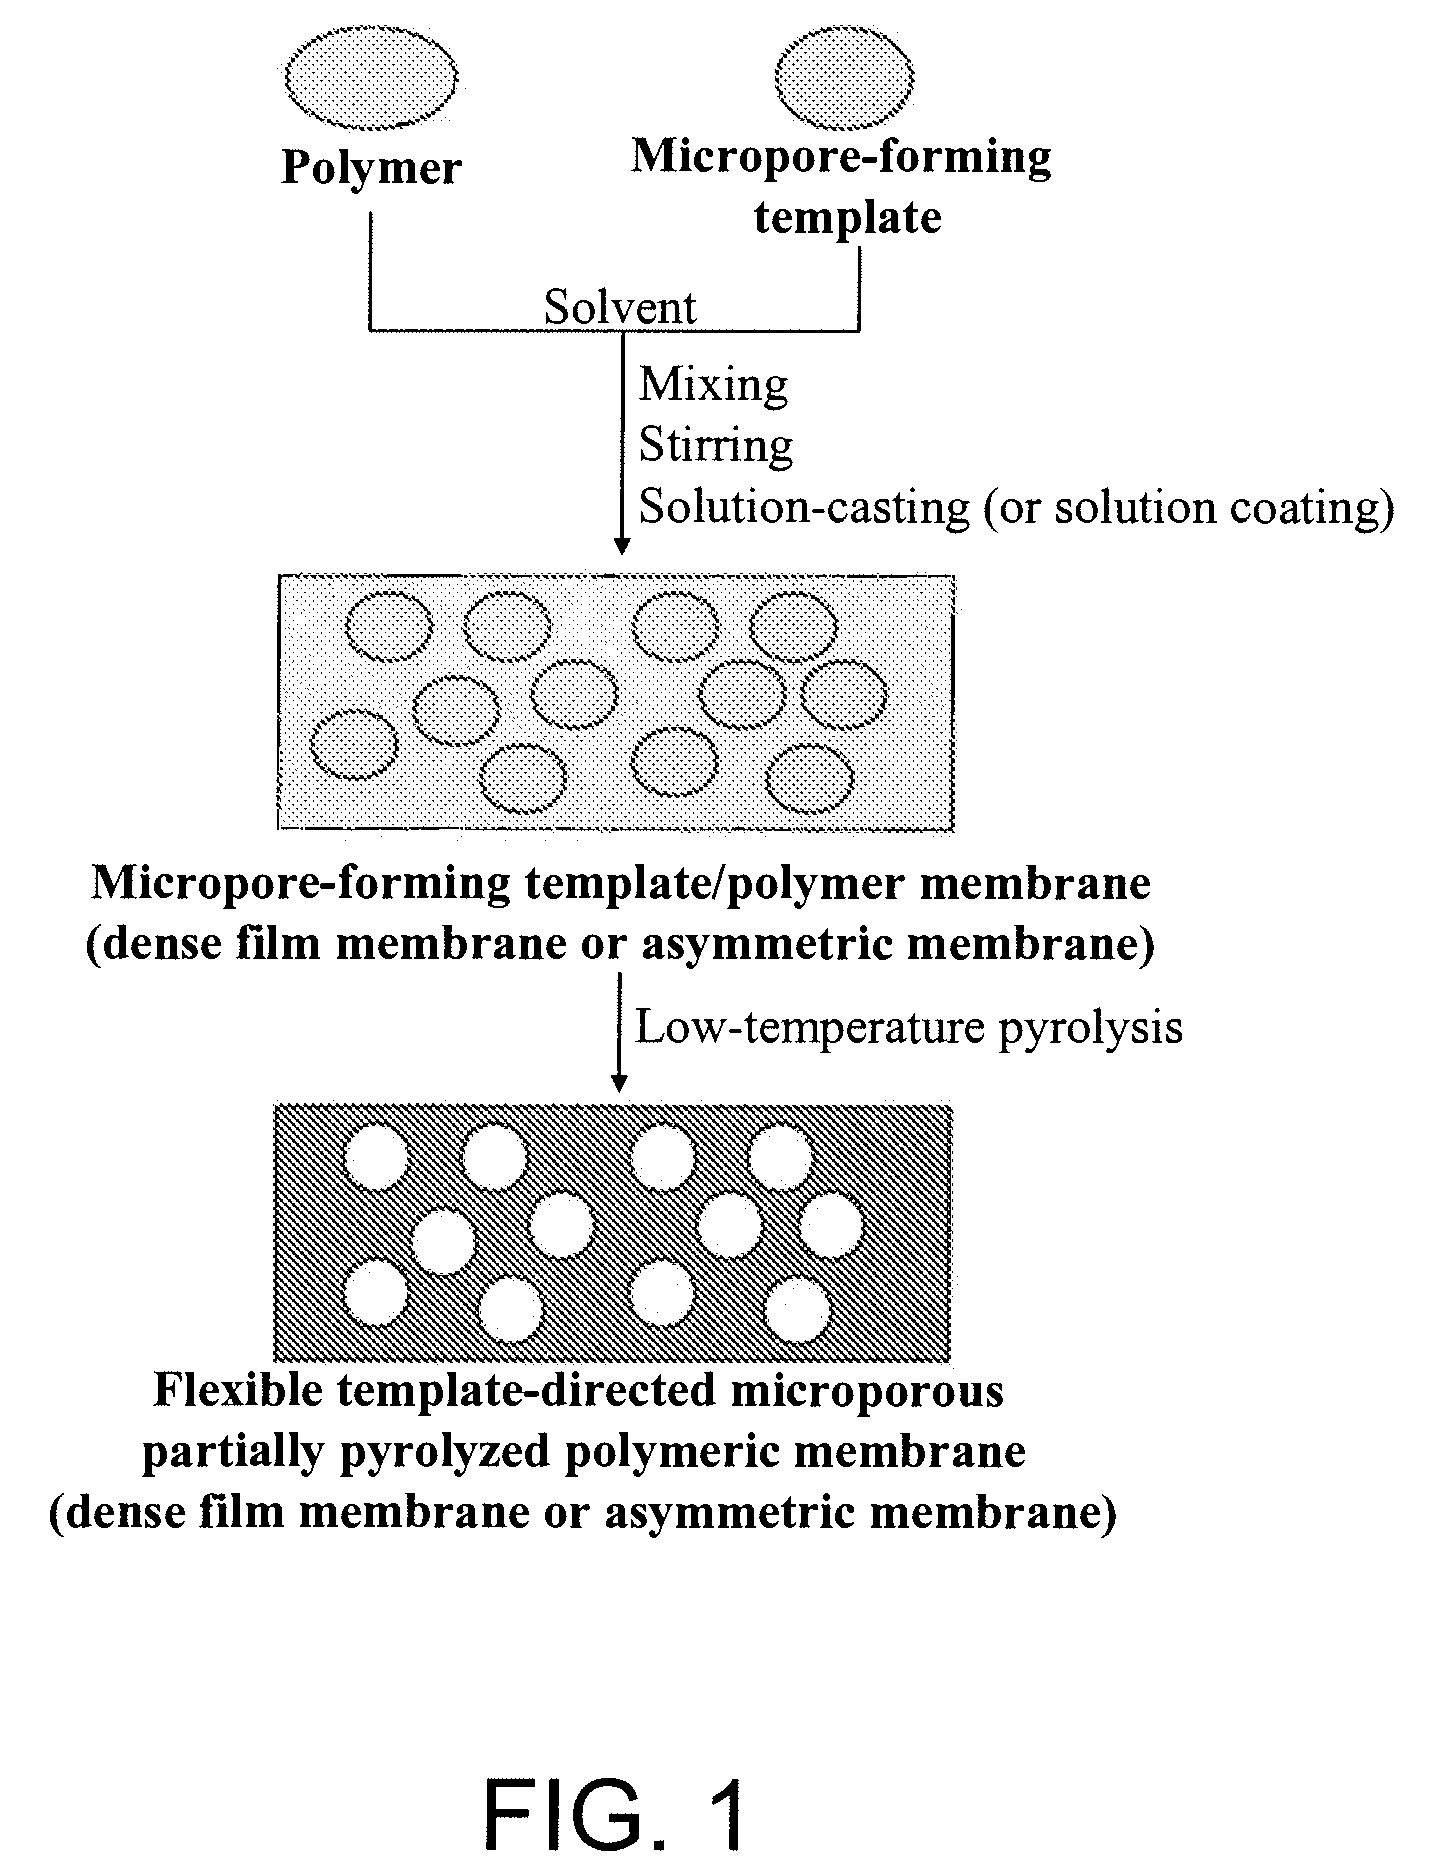 Flexible Template-Directed Microporous Partially Pyrolyzed Polymeric Membranes